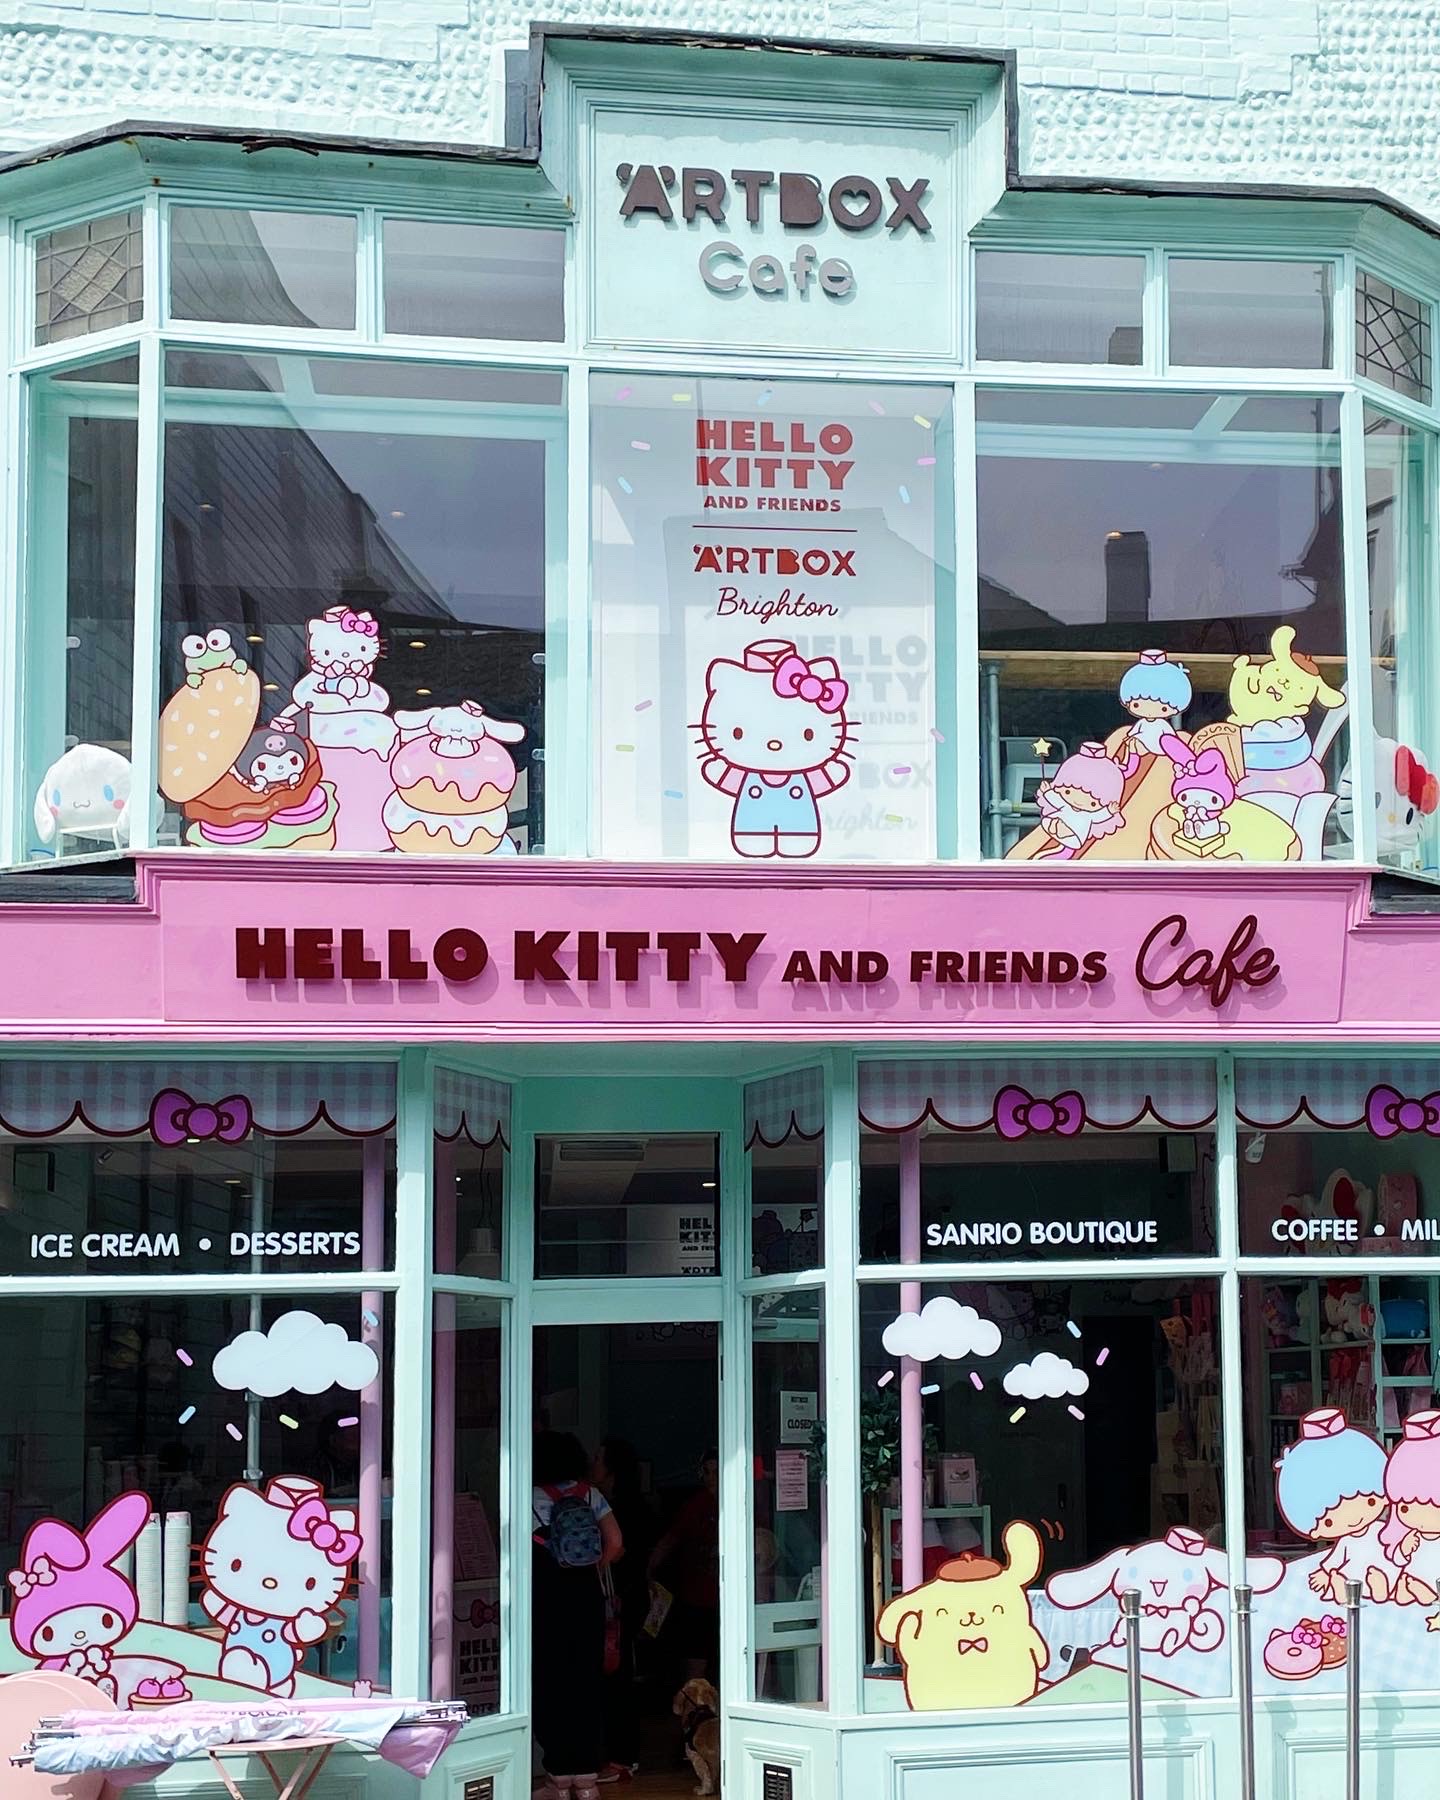 outside of ARTBOX Cafe with big hello kitty character stickers in windows.